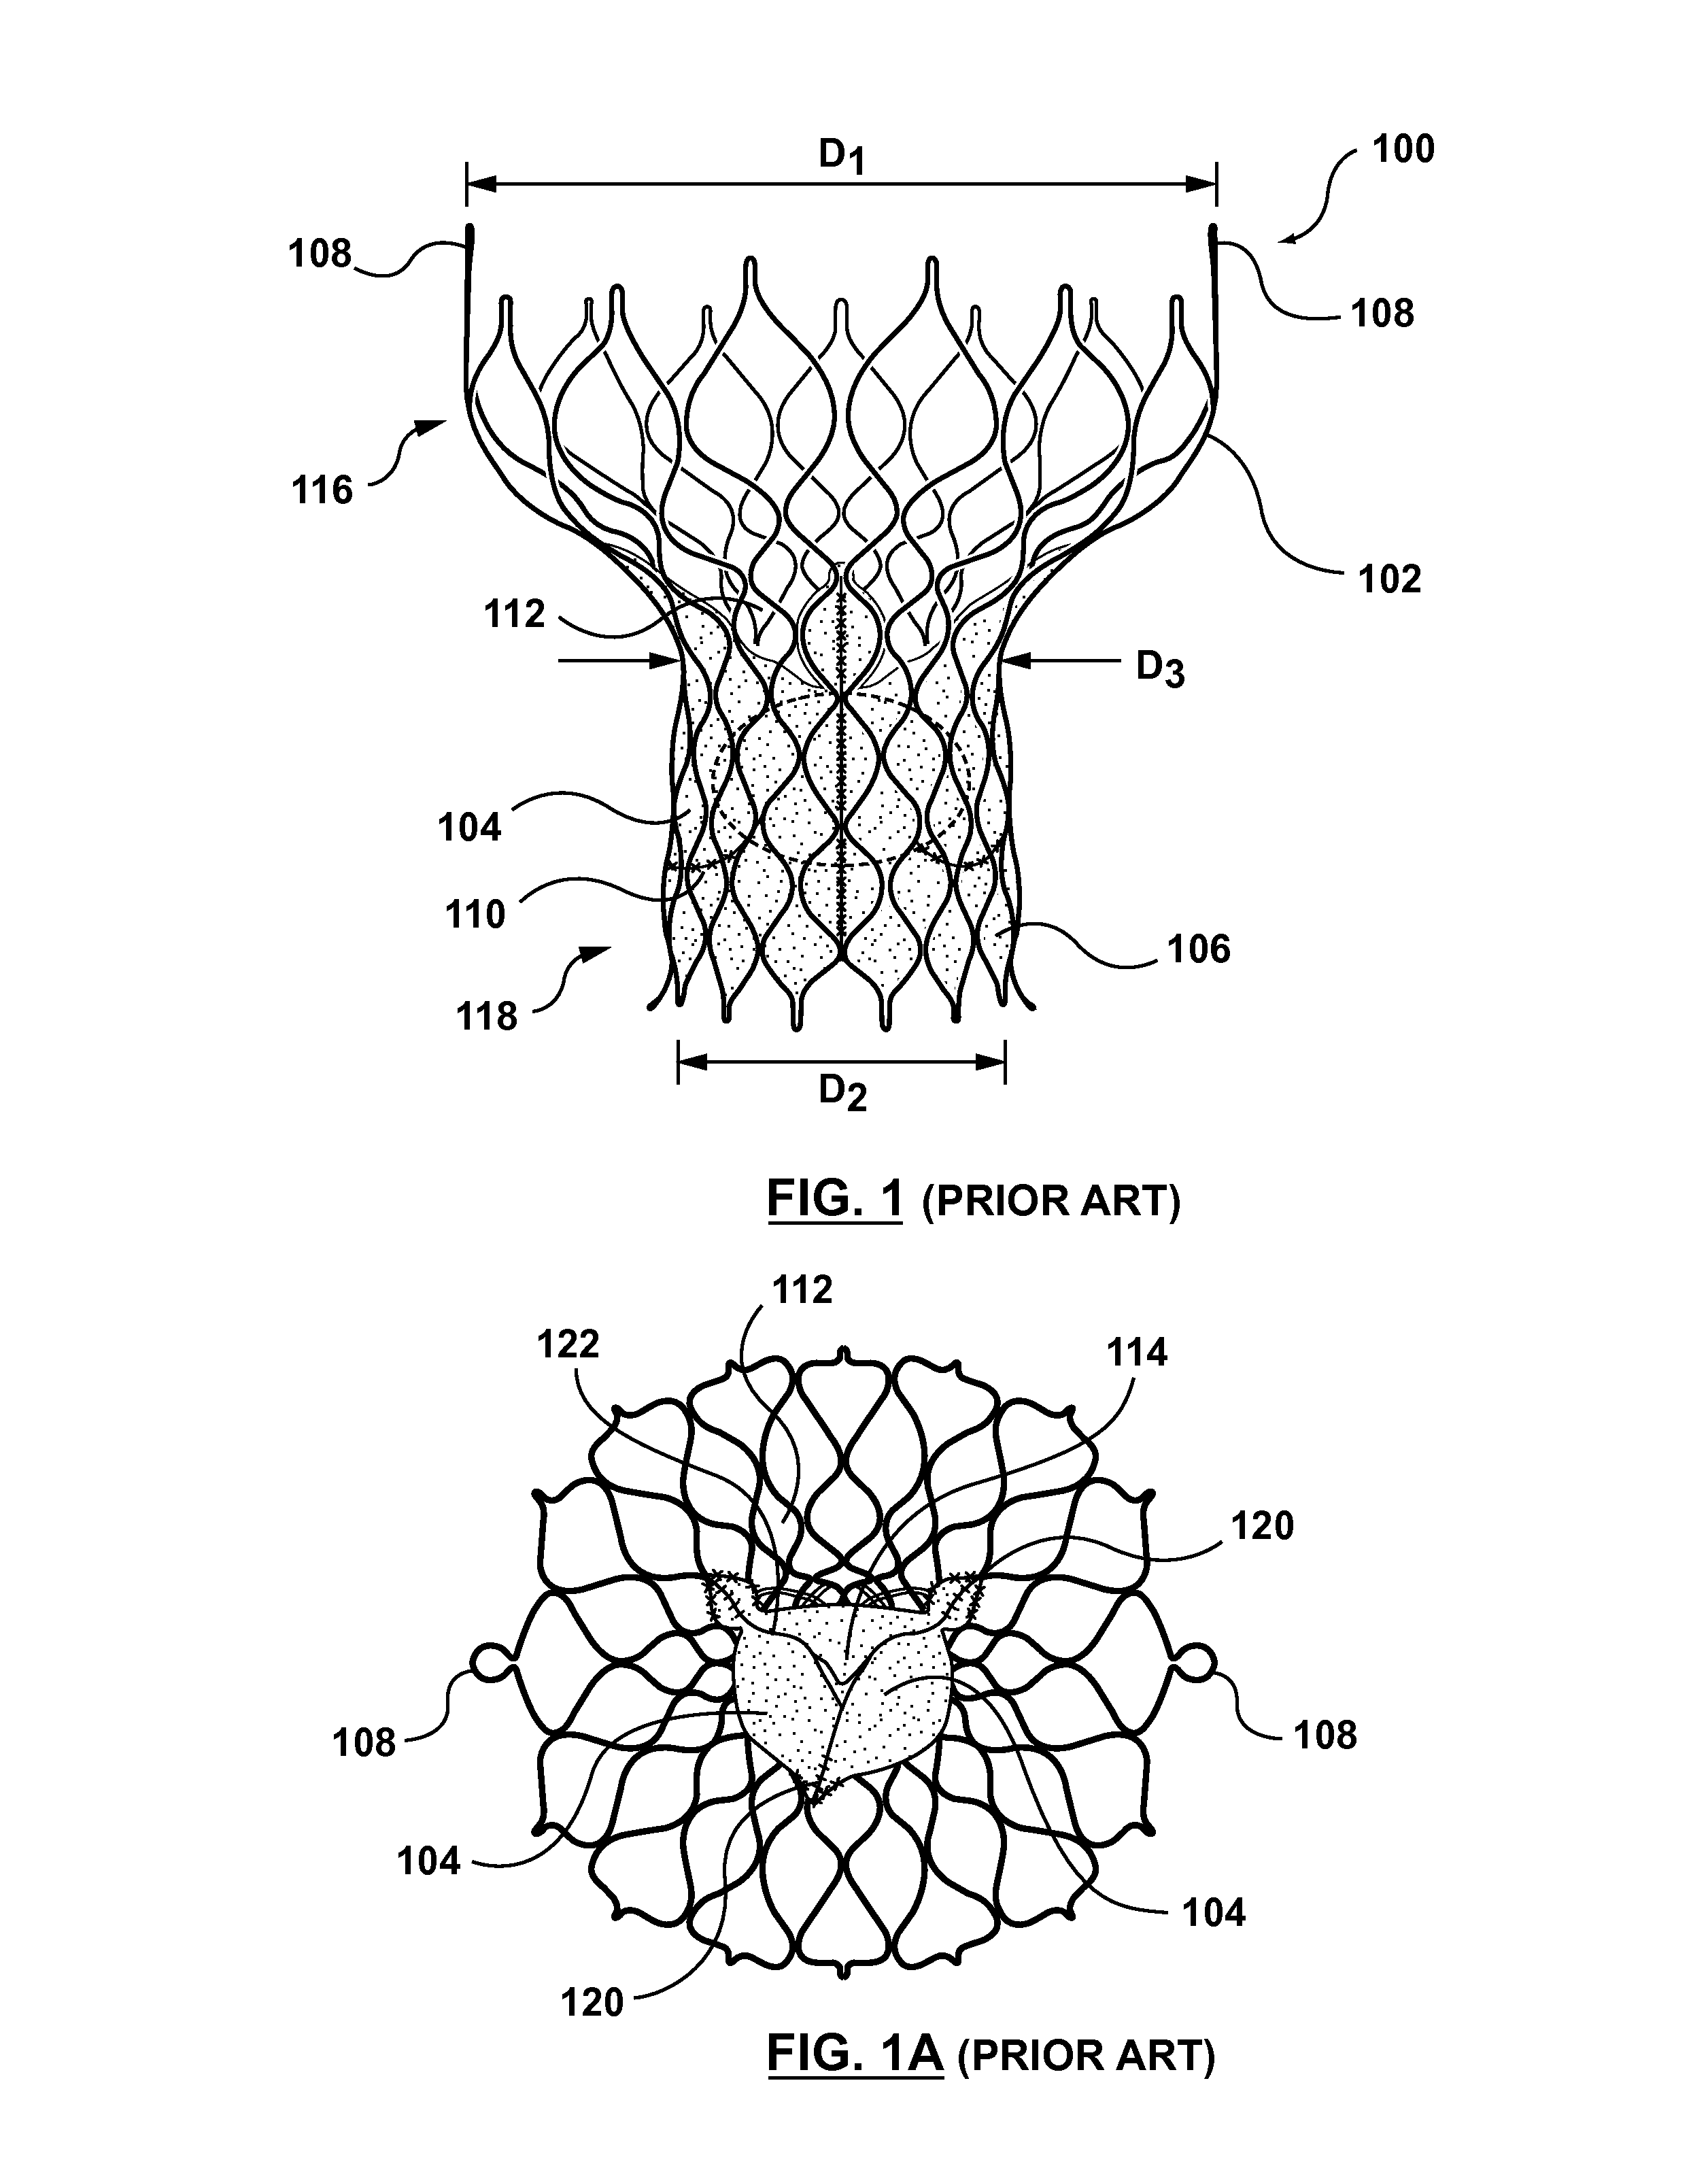 Transcatheter valve prostheses having a sealing component formed from tissue having an altered extracellular matrix